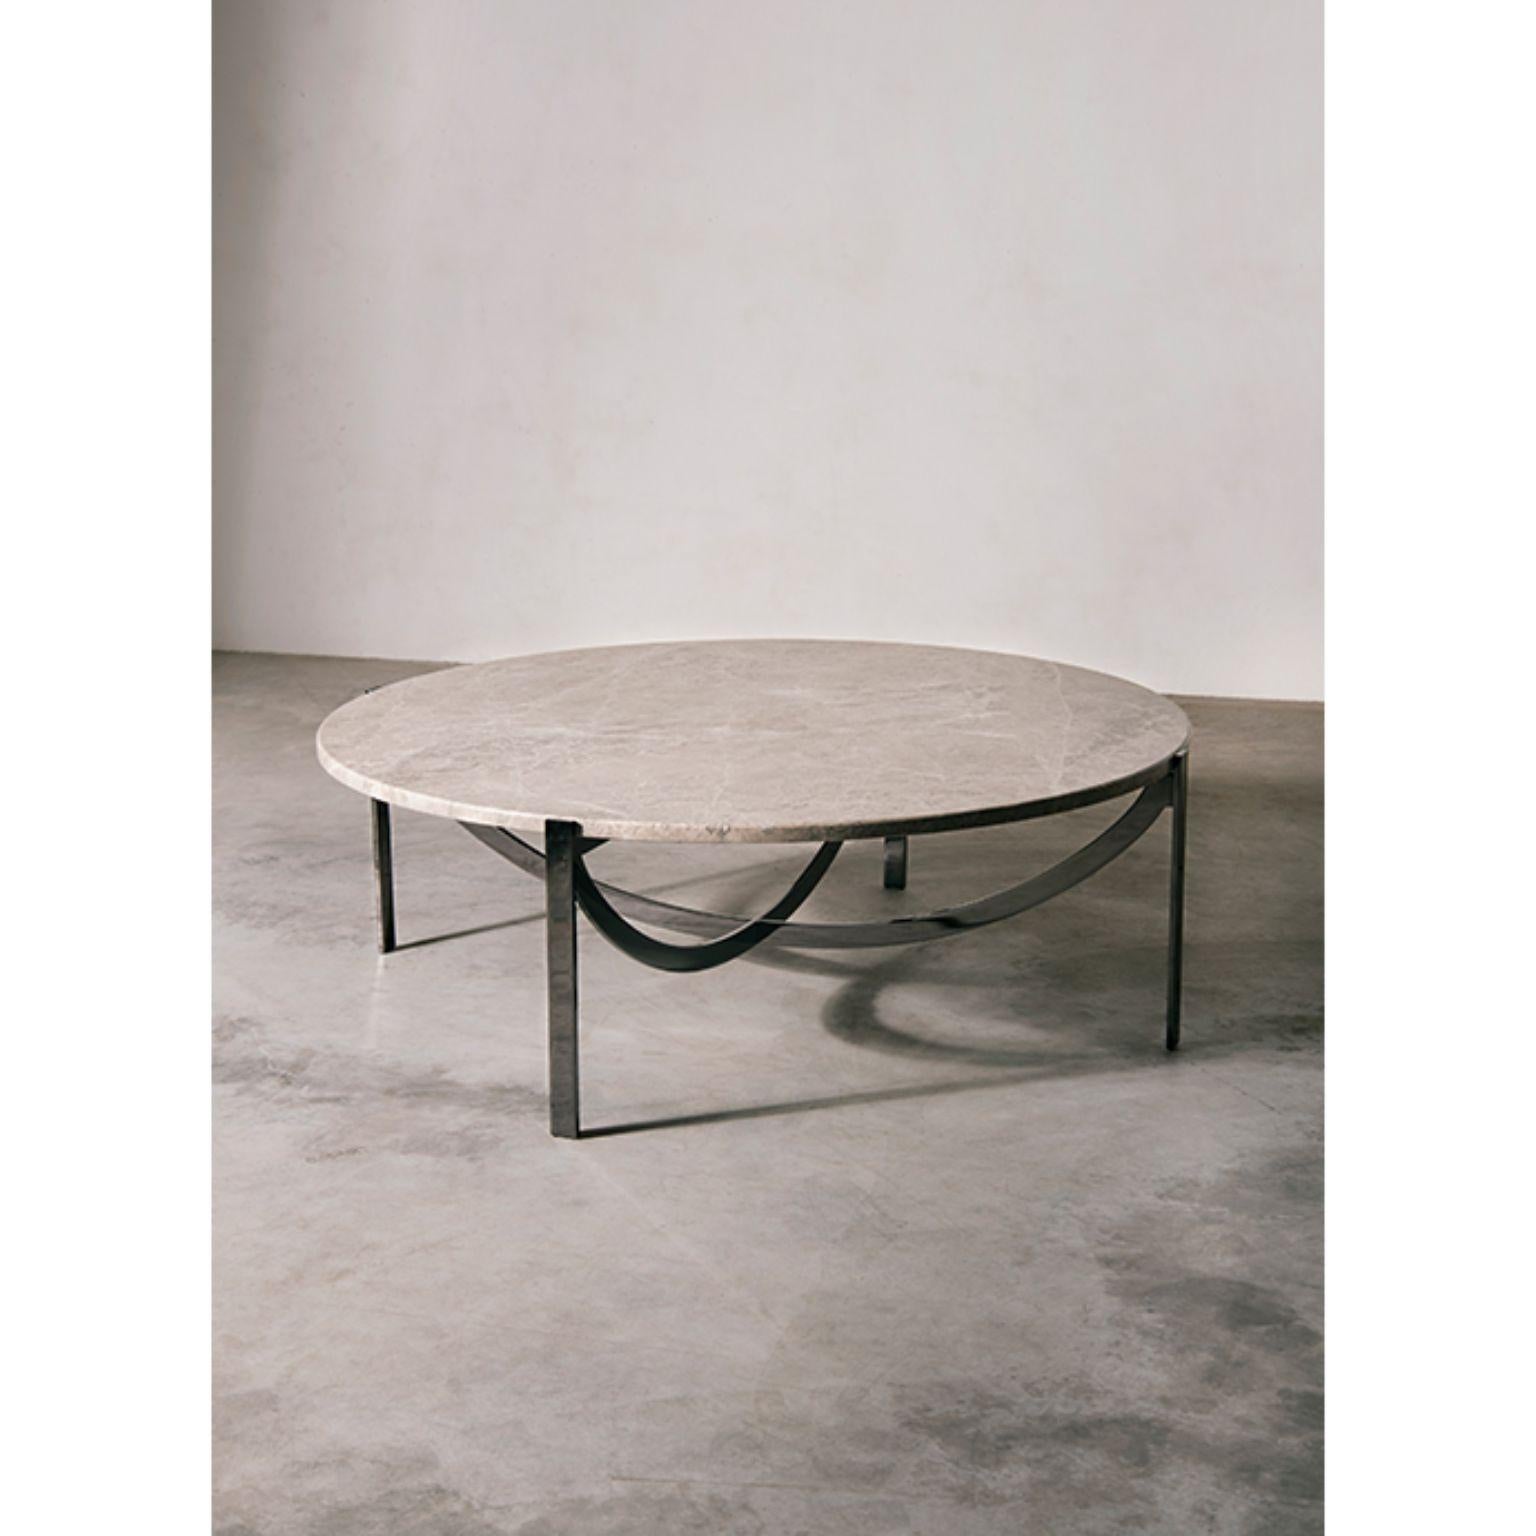 Big Astra coffee table by Patrick Norguet
Materials: Marble, metal structure
Dimensions: Ø 101.6 x H 33.8 cm

The Astra family of coffee tables surprises by its sophisticated simplicity.
It was named as a tribute to those old instruments, which